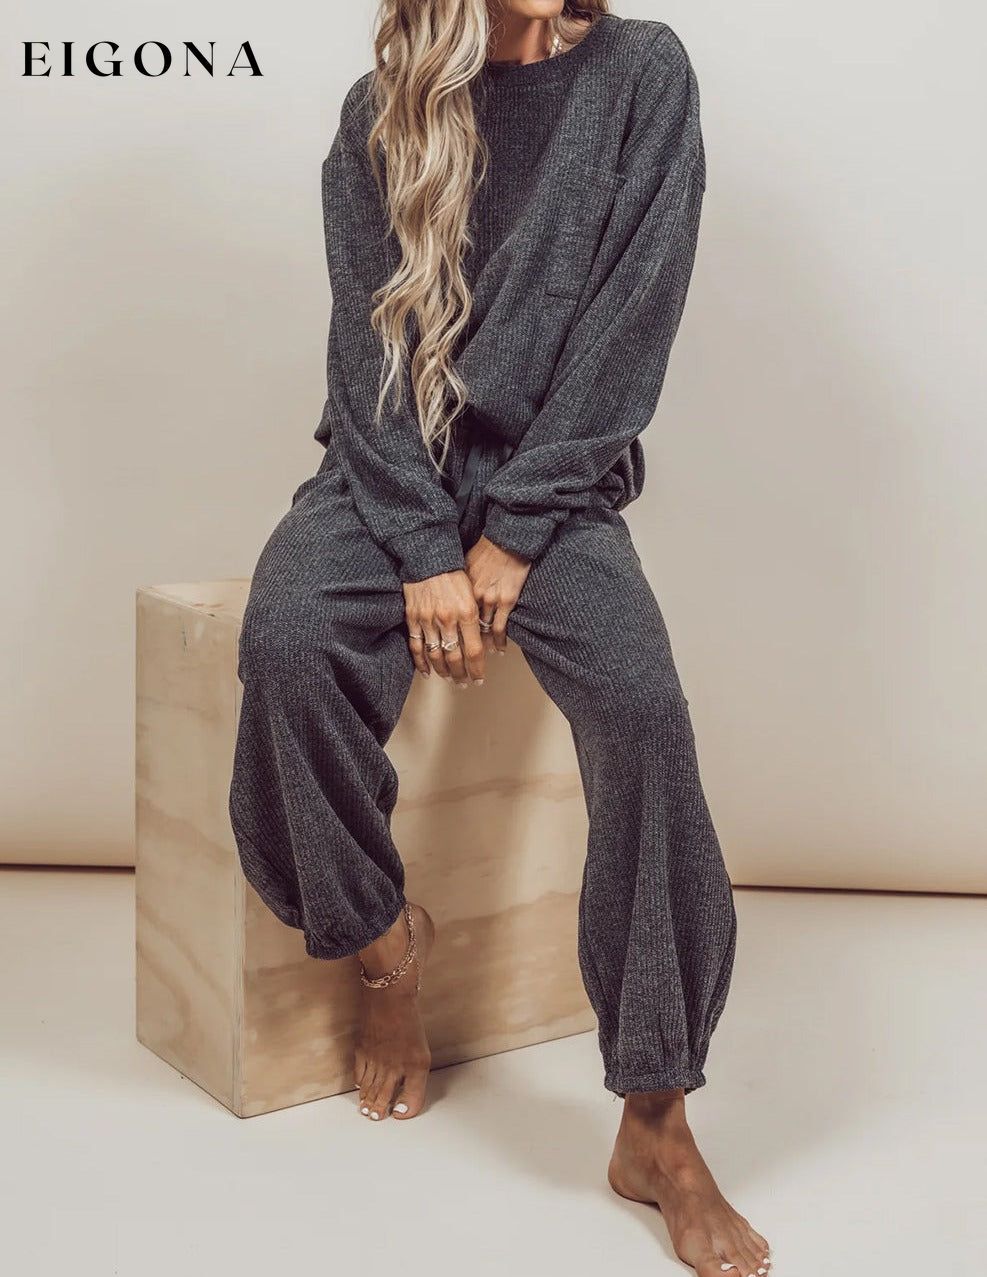 Carbon Grey Heather Ribbed Drop Shoulder Drawstring Pants Lounge Set All In Stock clothes Fabric Ribbed lounge wear loungewear Occasion Home pajamas pijamas Print Solid Color Season Winter Style Casual